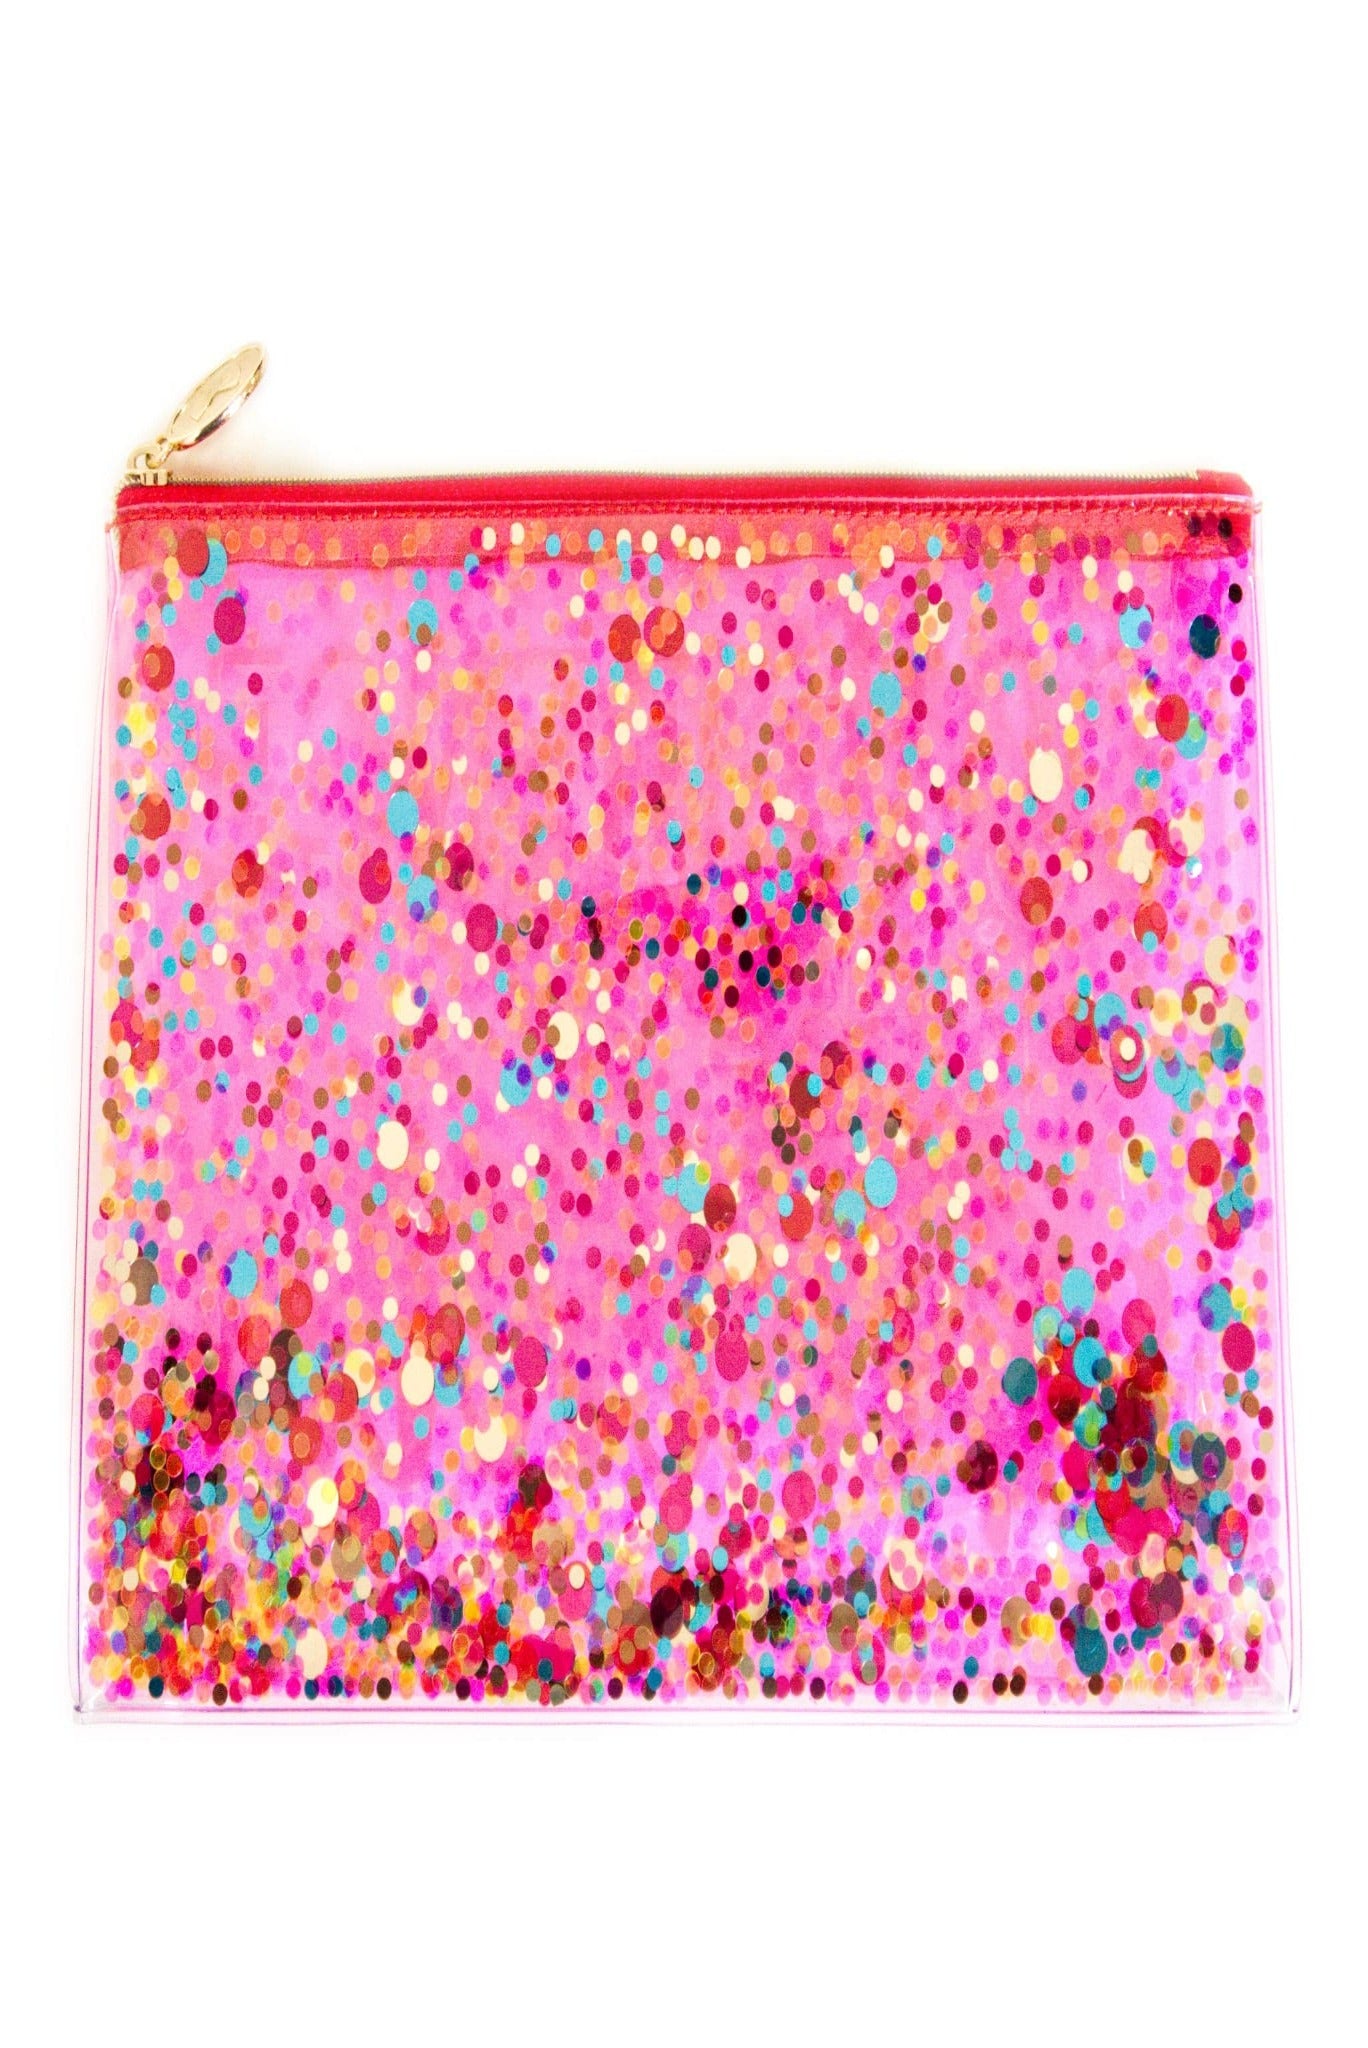 CONFIDENCE IS THE NEW SPARKLE BAG